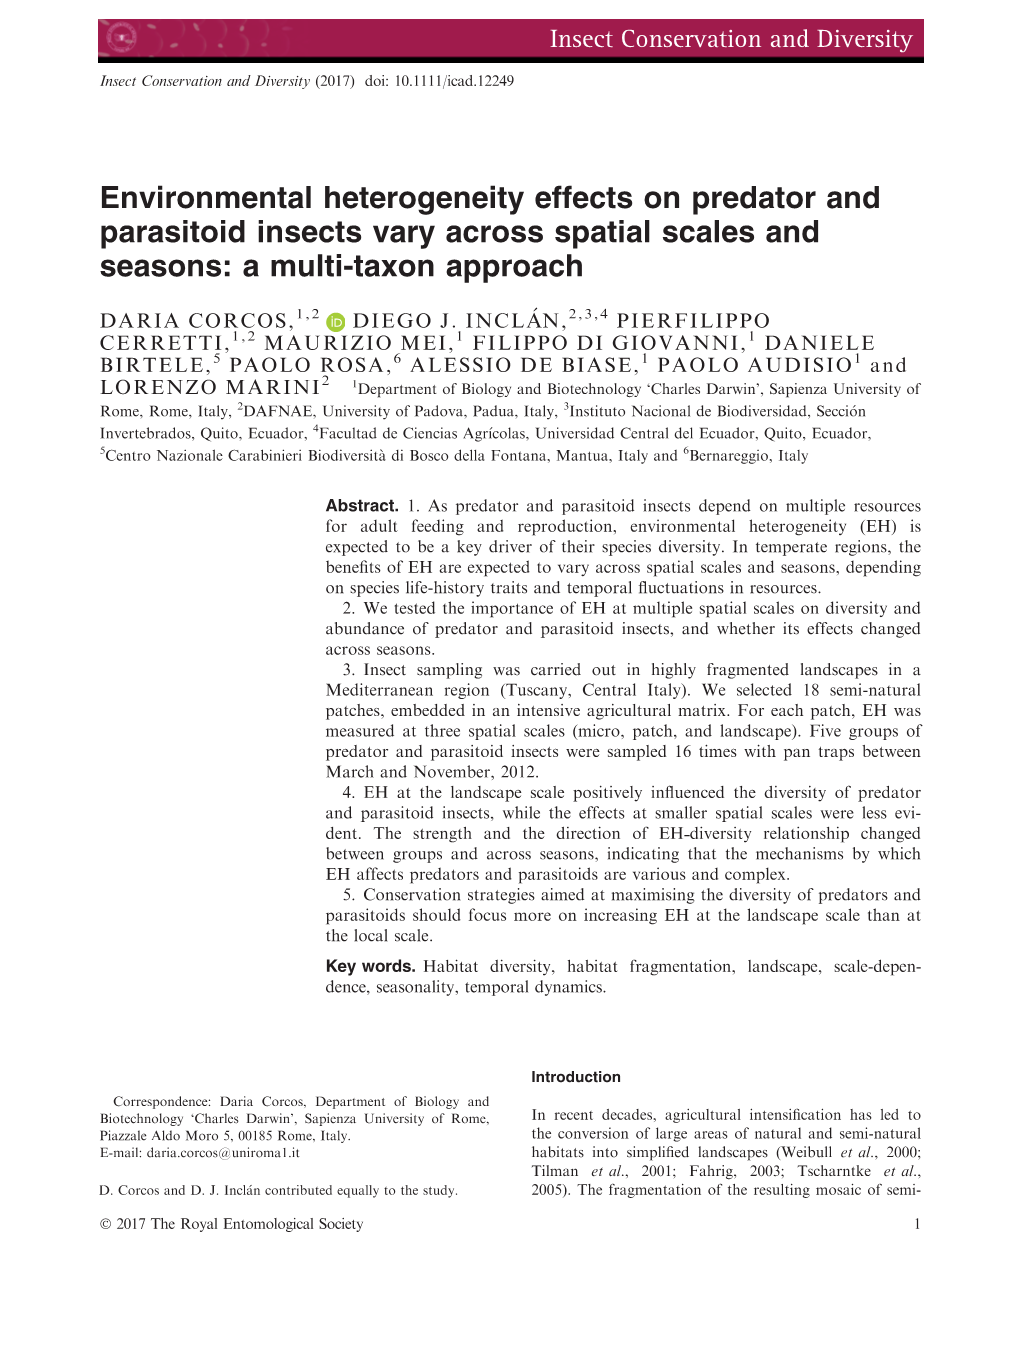 Environmental Heterogeneity Effects on Predator and Parasitoid Insects Vary Across Spatial Scales and Seasons: a Multi-Taxon Approach